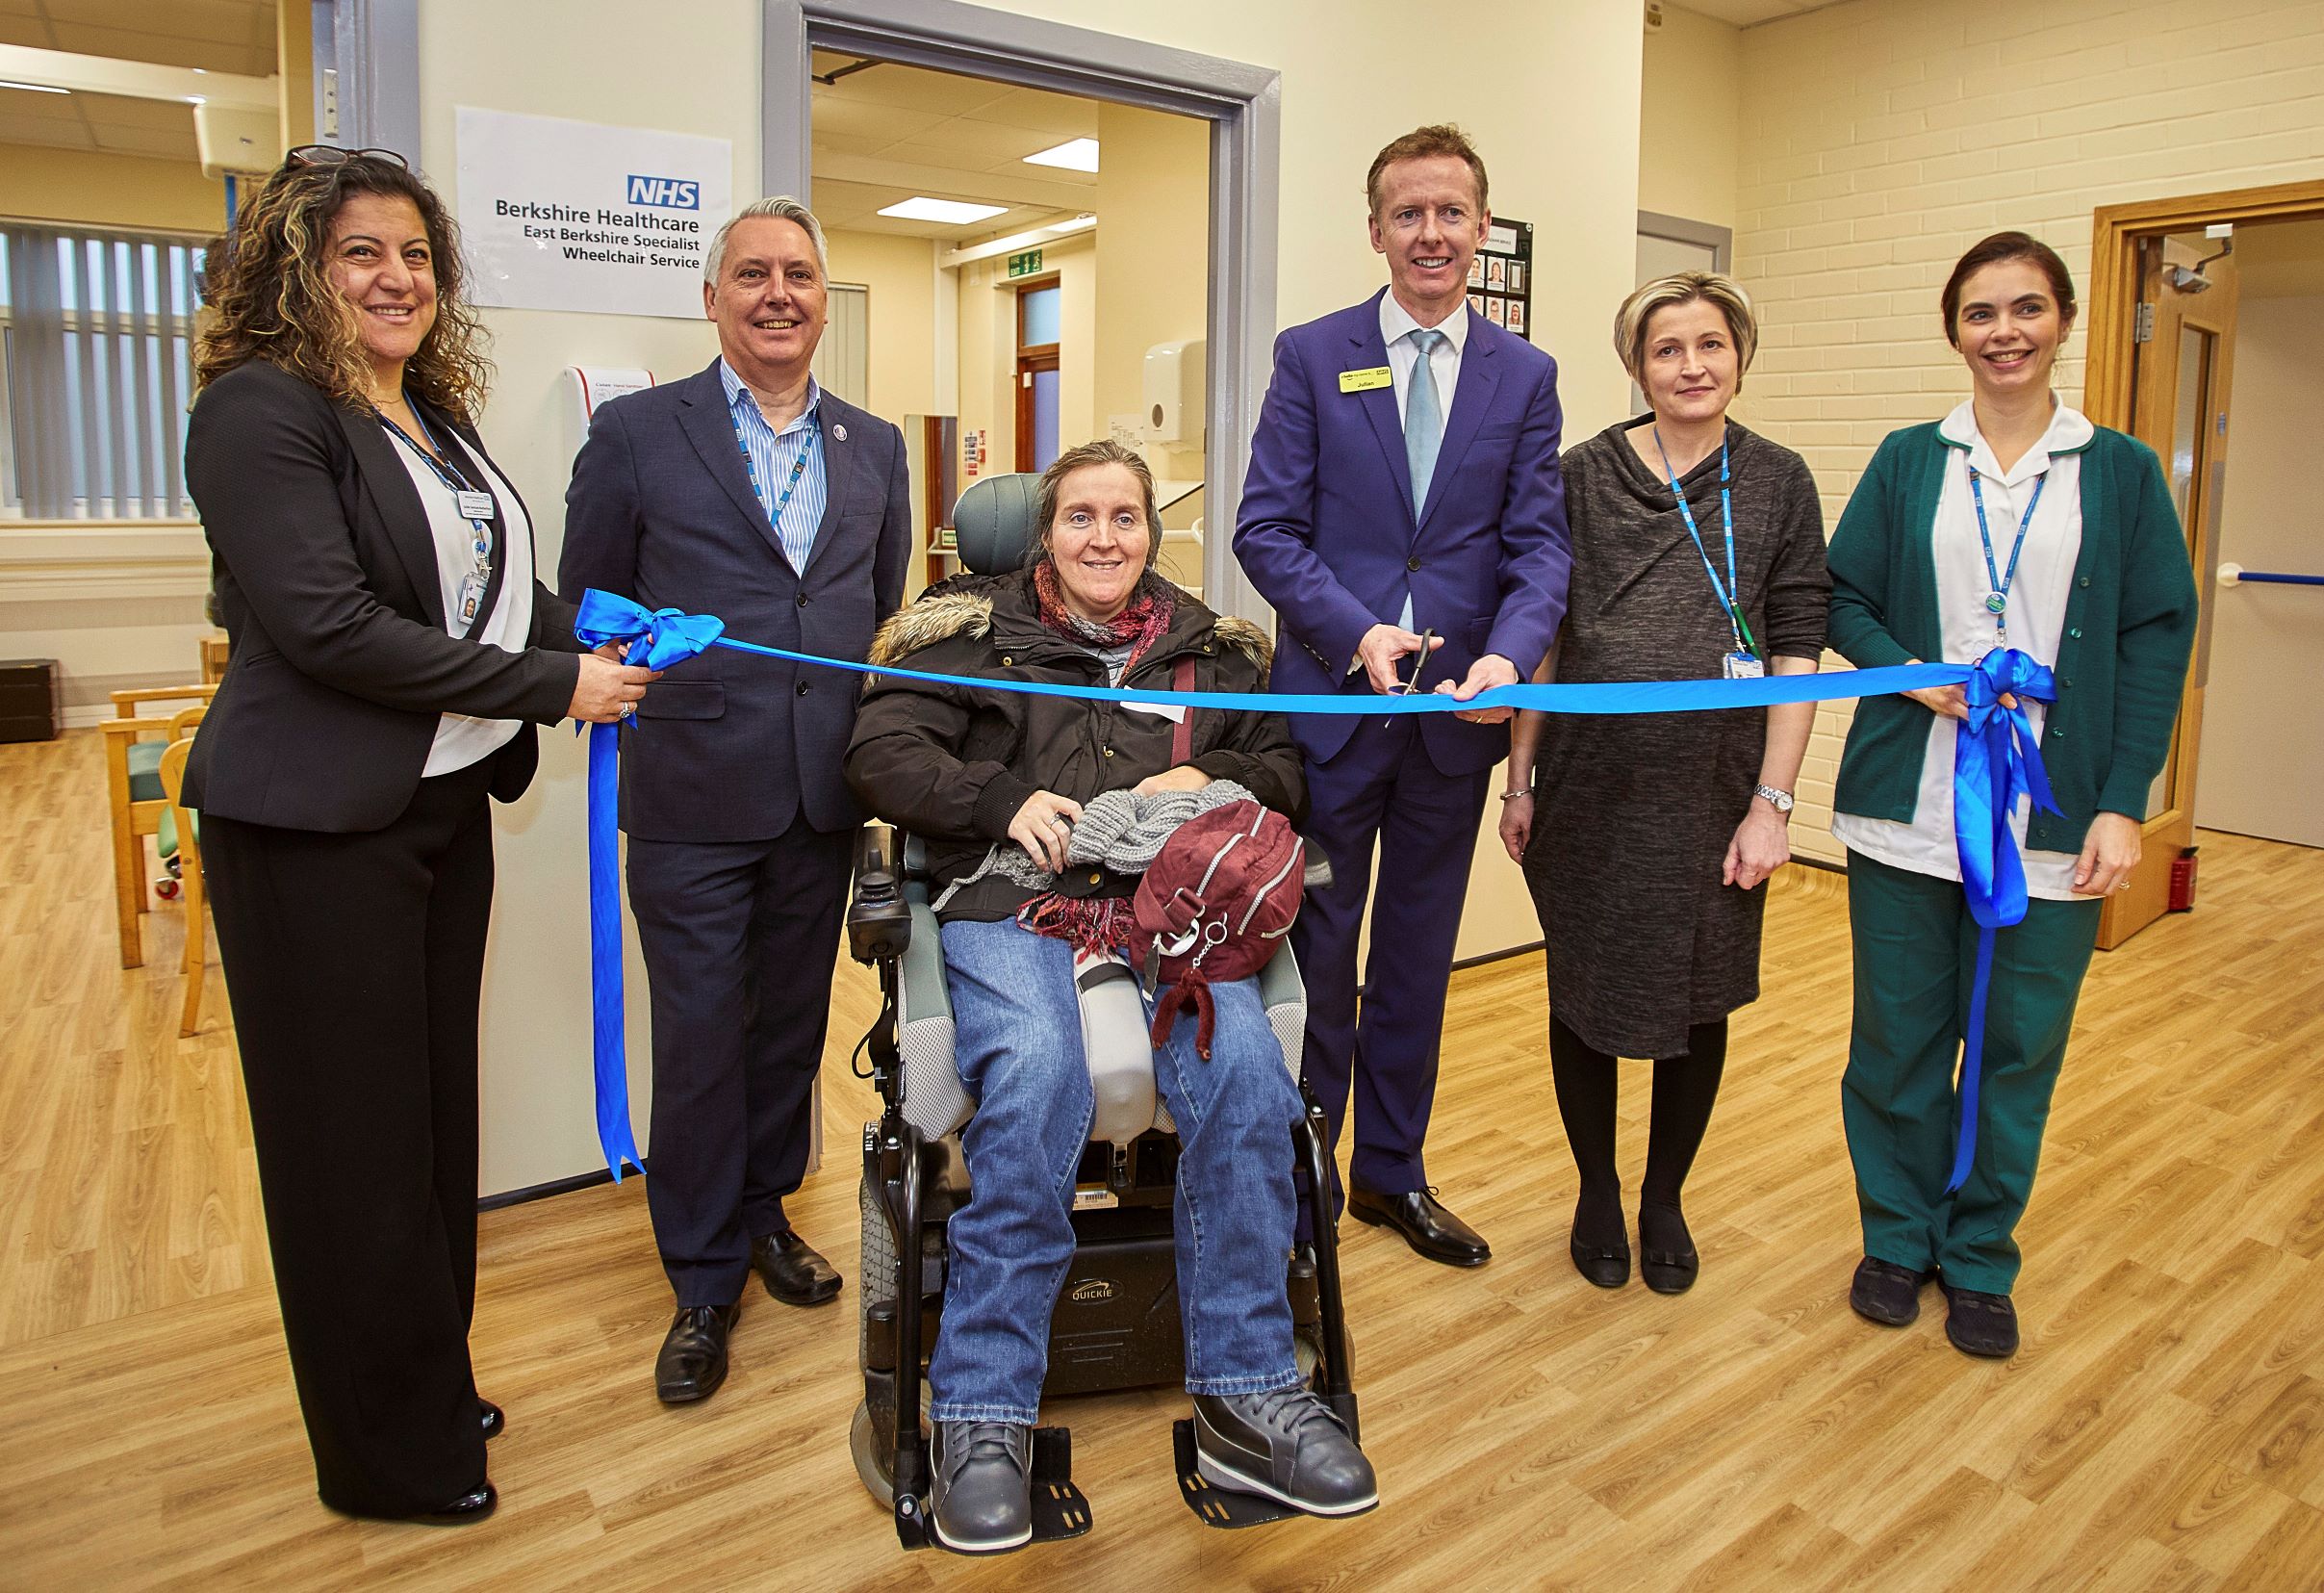 Our CEO Julian Emms with staff and patients cutting the official opening ribbon